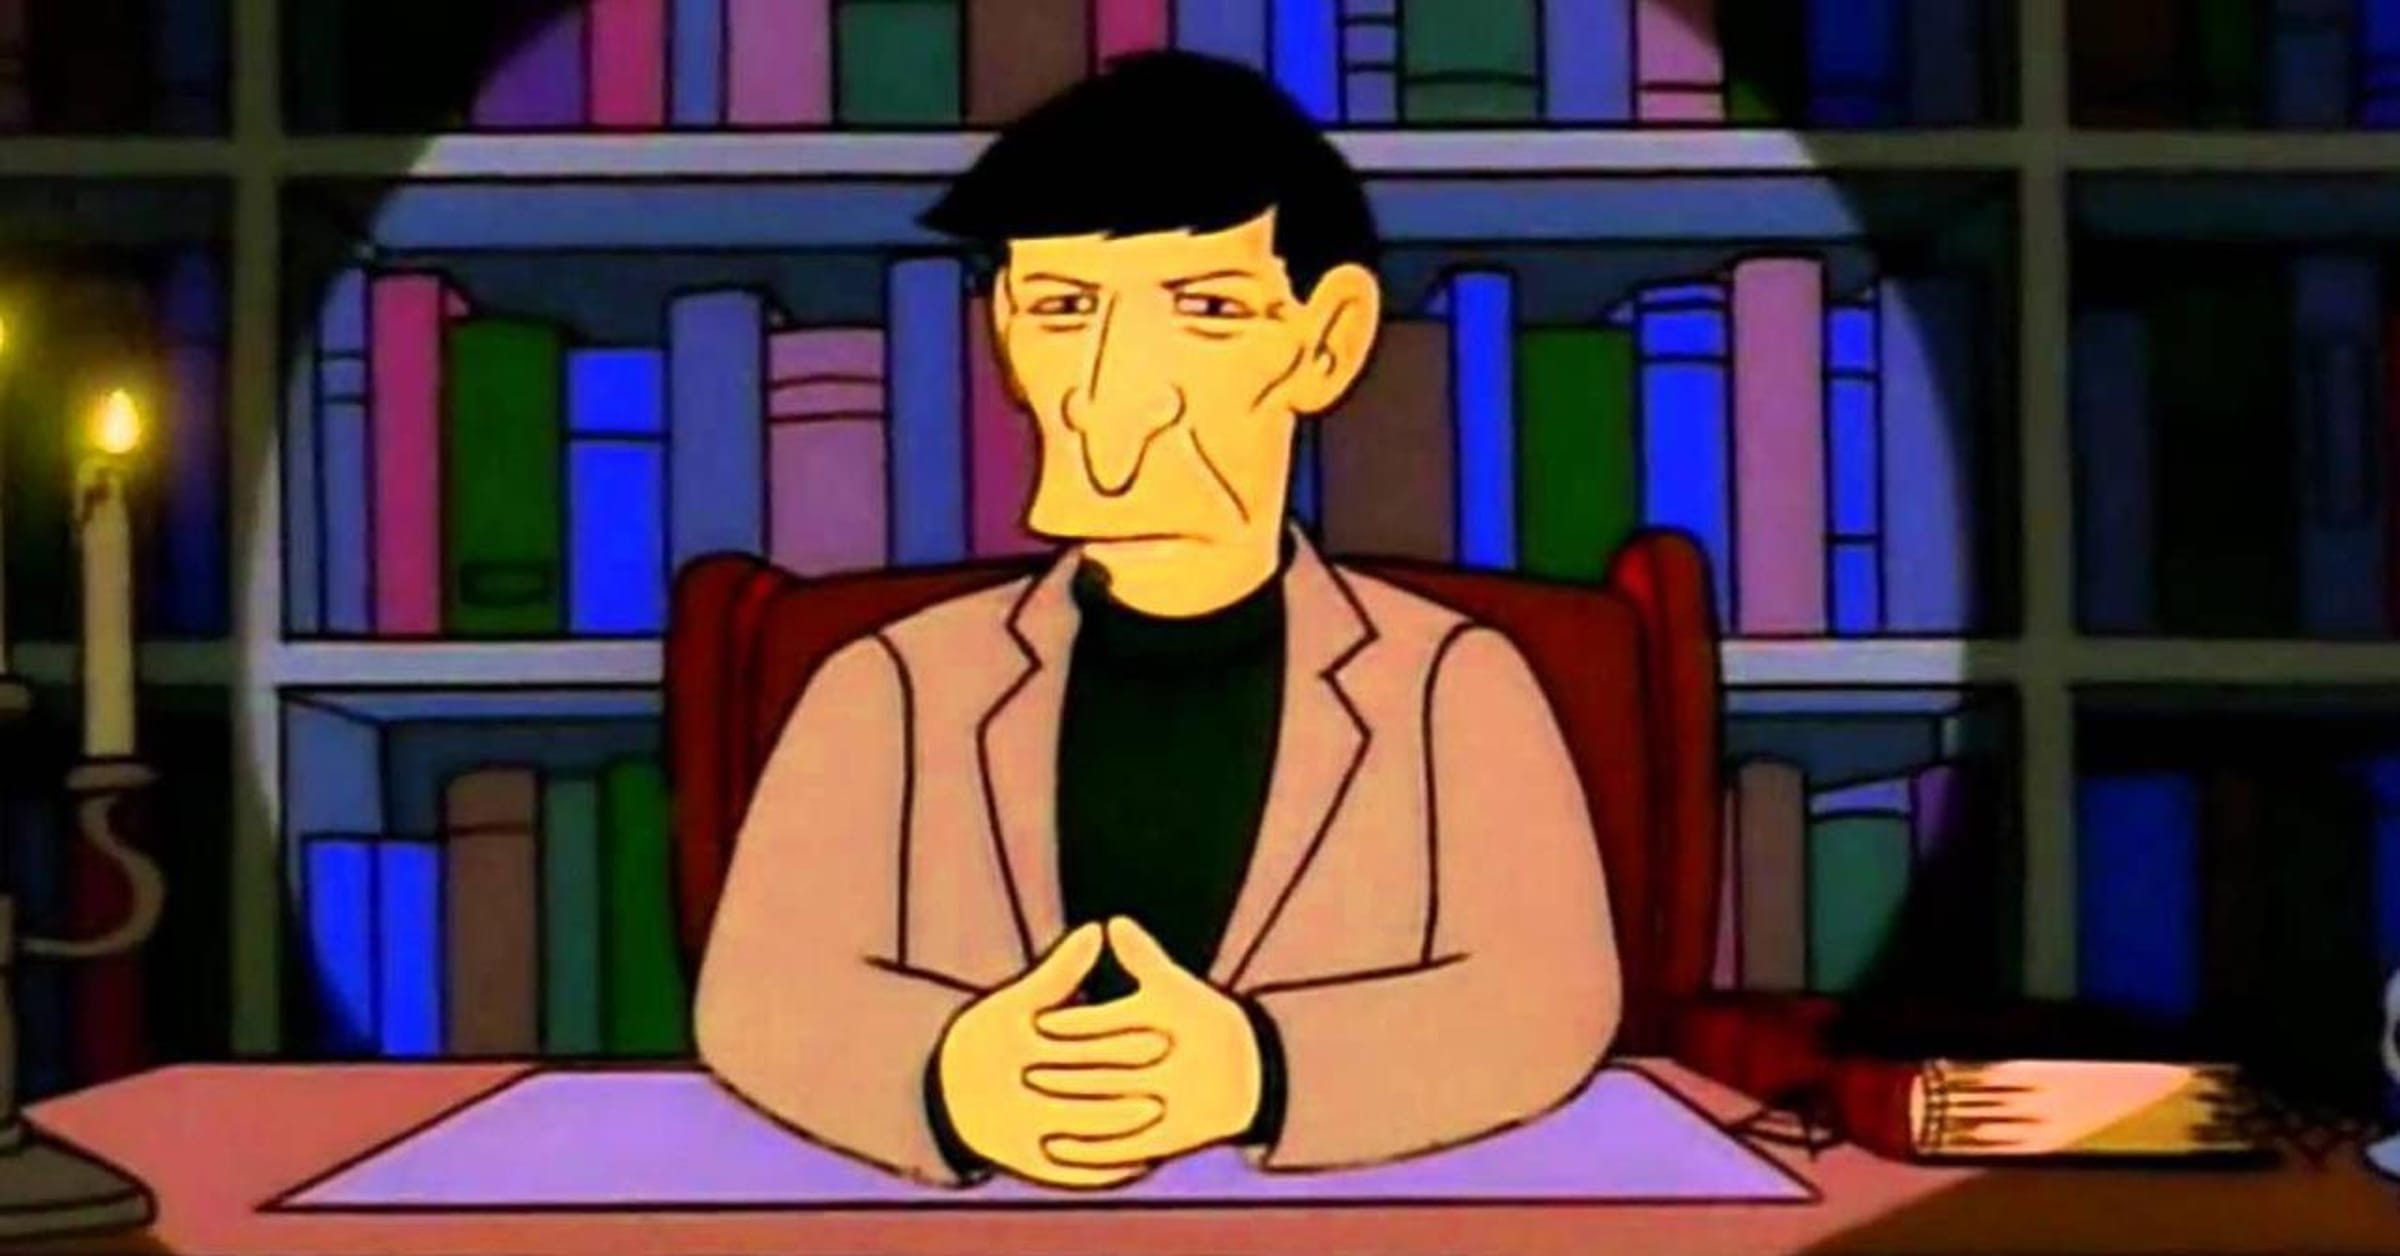 The 25 best celebrity cameos on The Simpsons